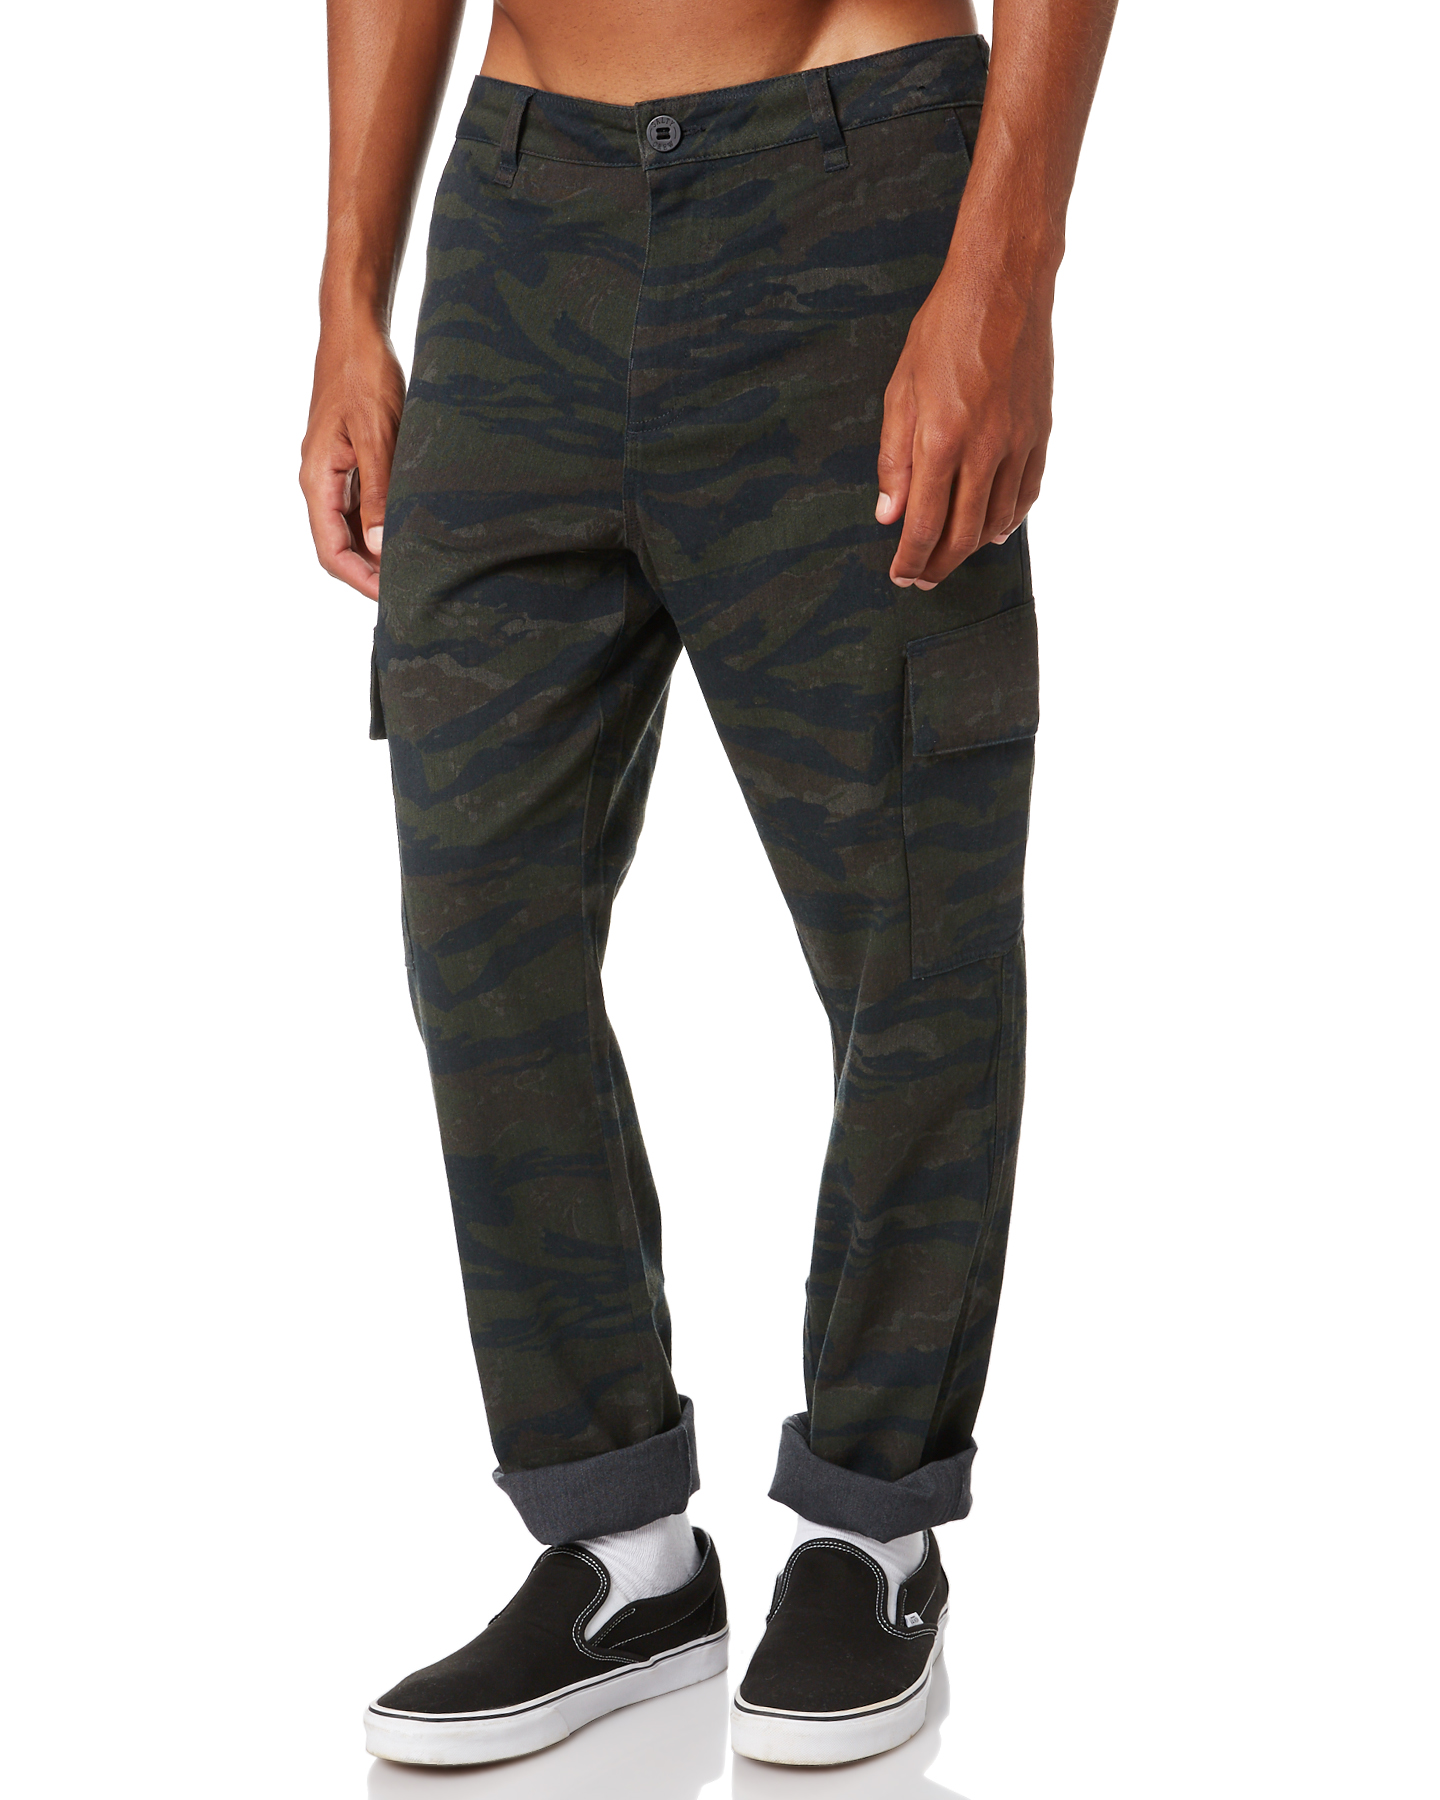 Salty Crew Cutty Mens Technical Fishing Cargo Pant - Camo | SurfStitch